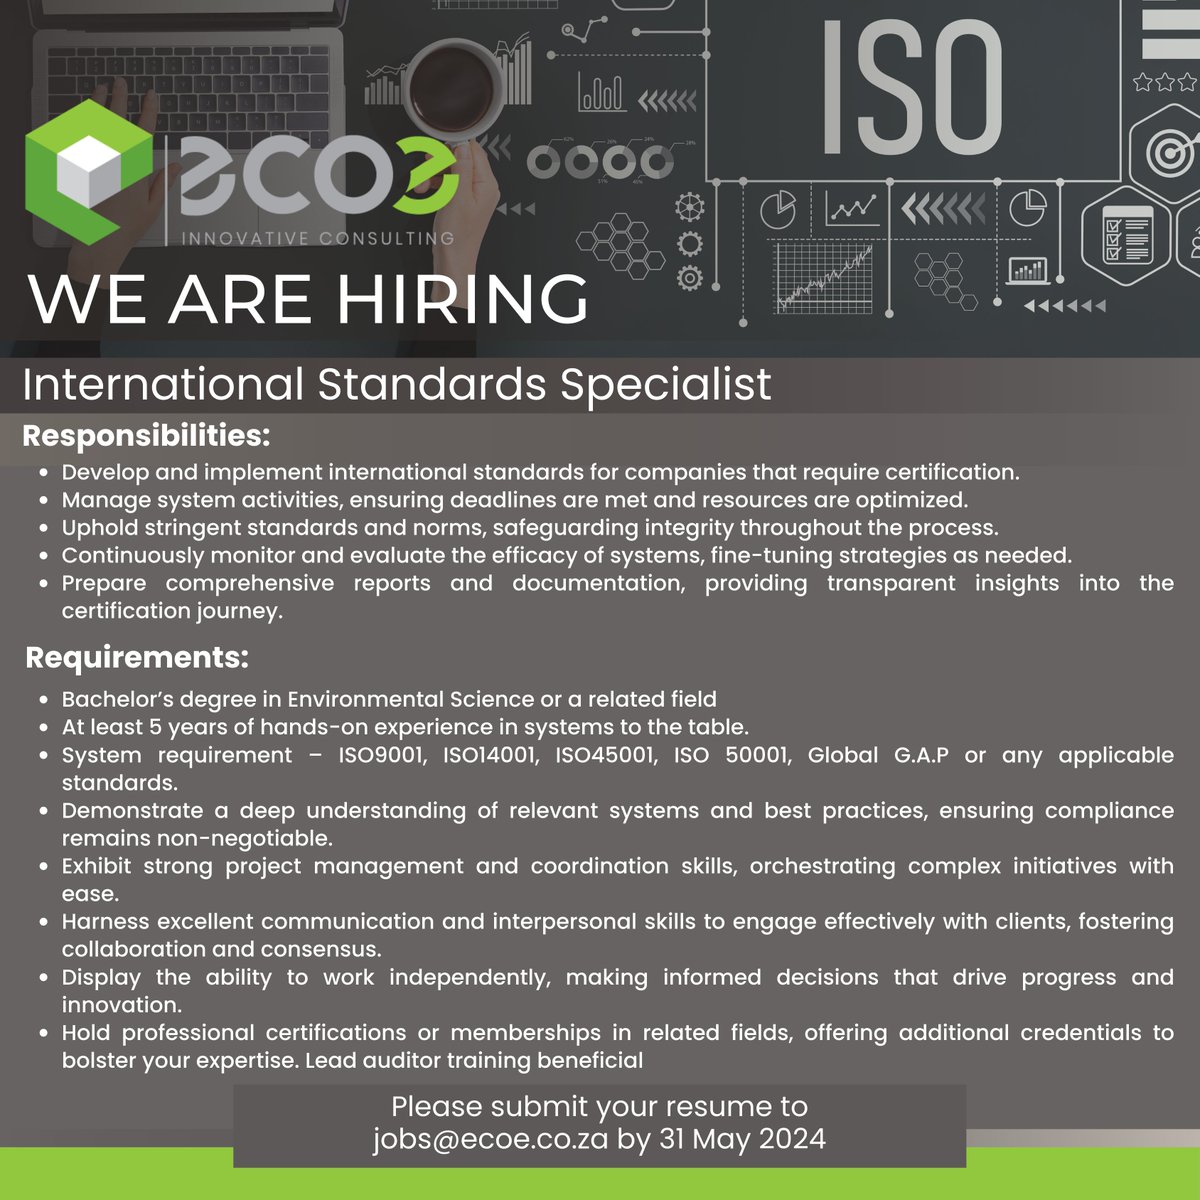 🌱 Join Our Team! International Standards Specialist

Please submit your resume to jobs@ecoe.co.za by 31 May 2024

#Vacancy #EcoElementum #EnvironmentalScience #JobOpportunity